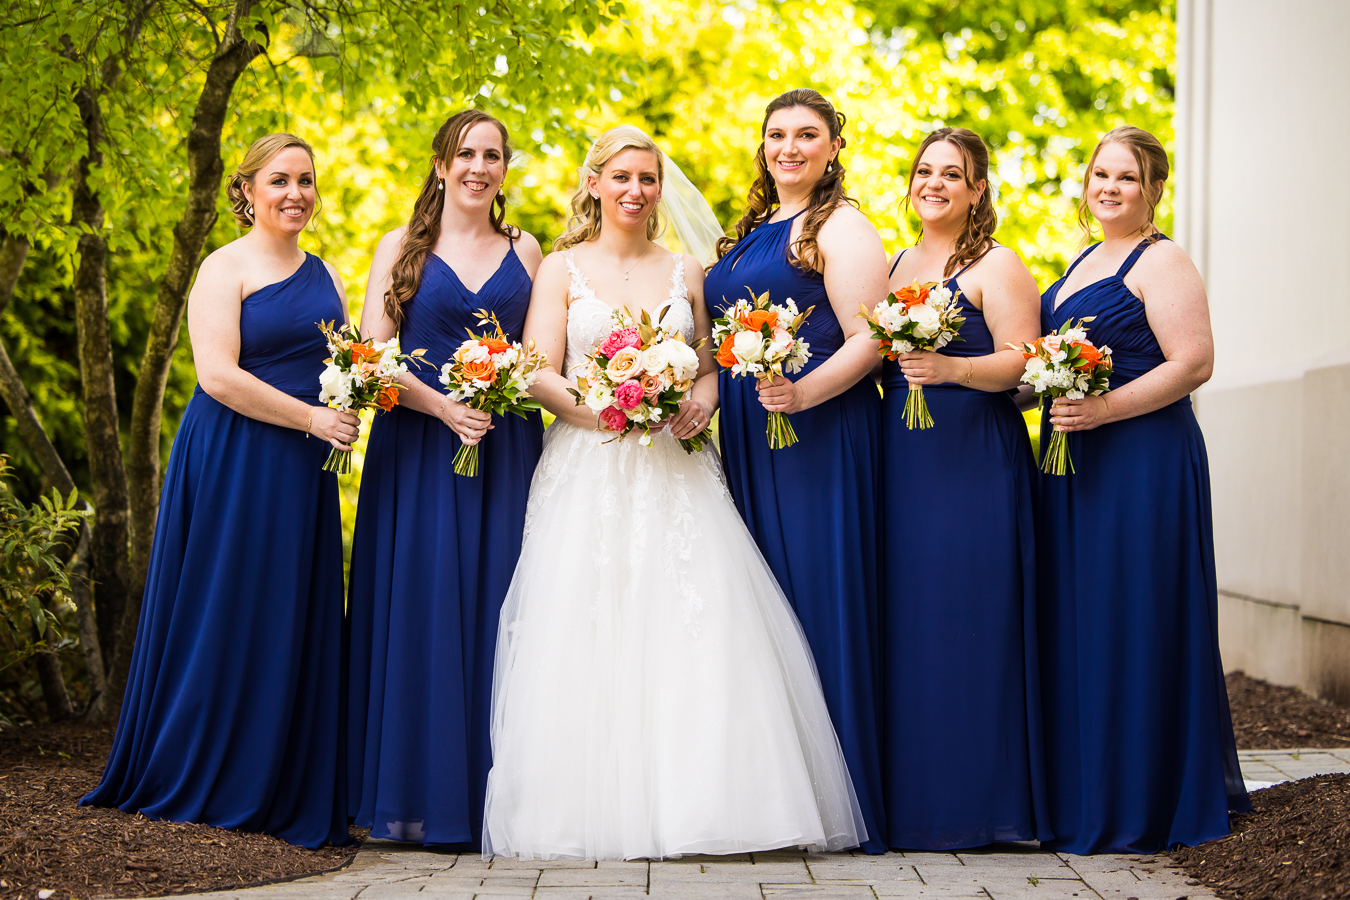 new jersey wedding photographer, lisa rhinehart, captures this traditional image of the bride with her bridesmaid before their creative, unique wedding at the palace at somerset park